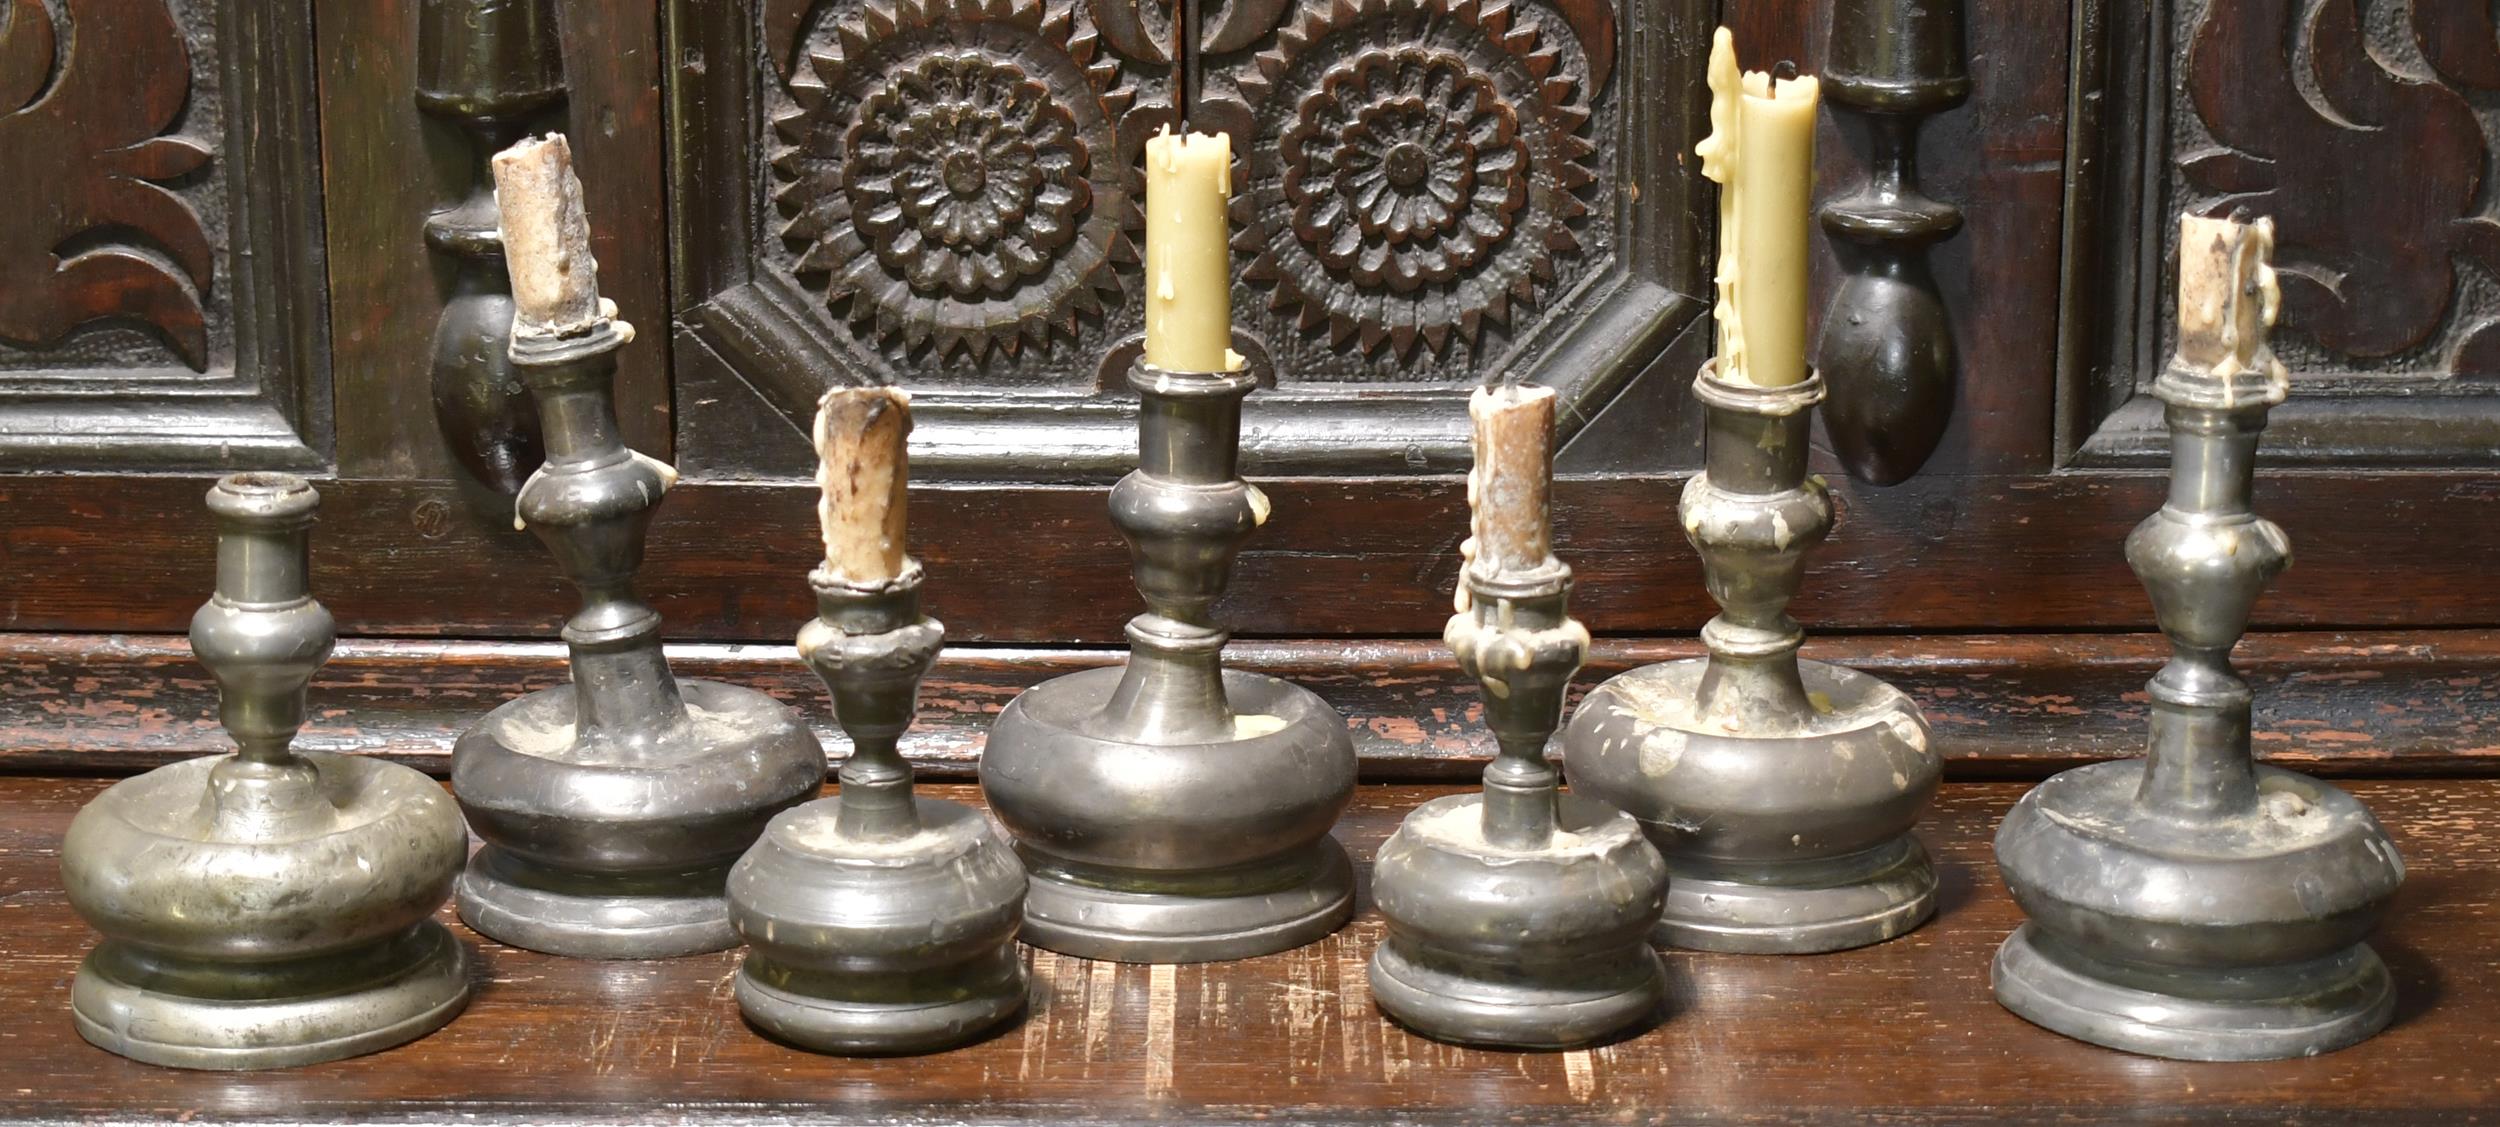 GROUP OF SMALL 17TH C. PEWTER CANDLESTICKS.